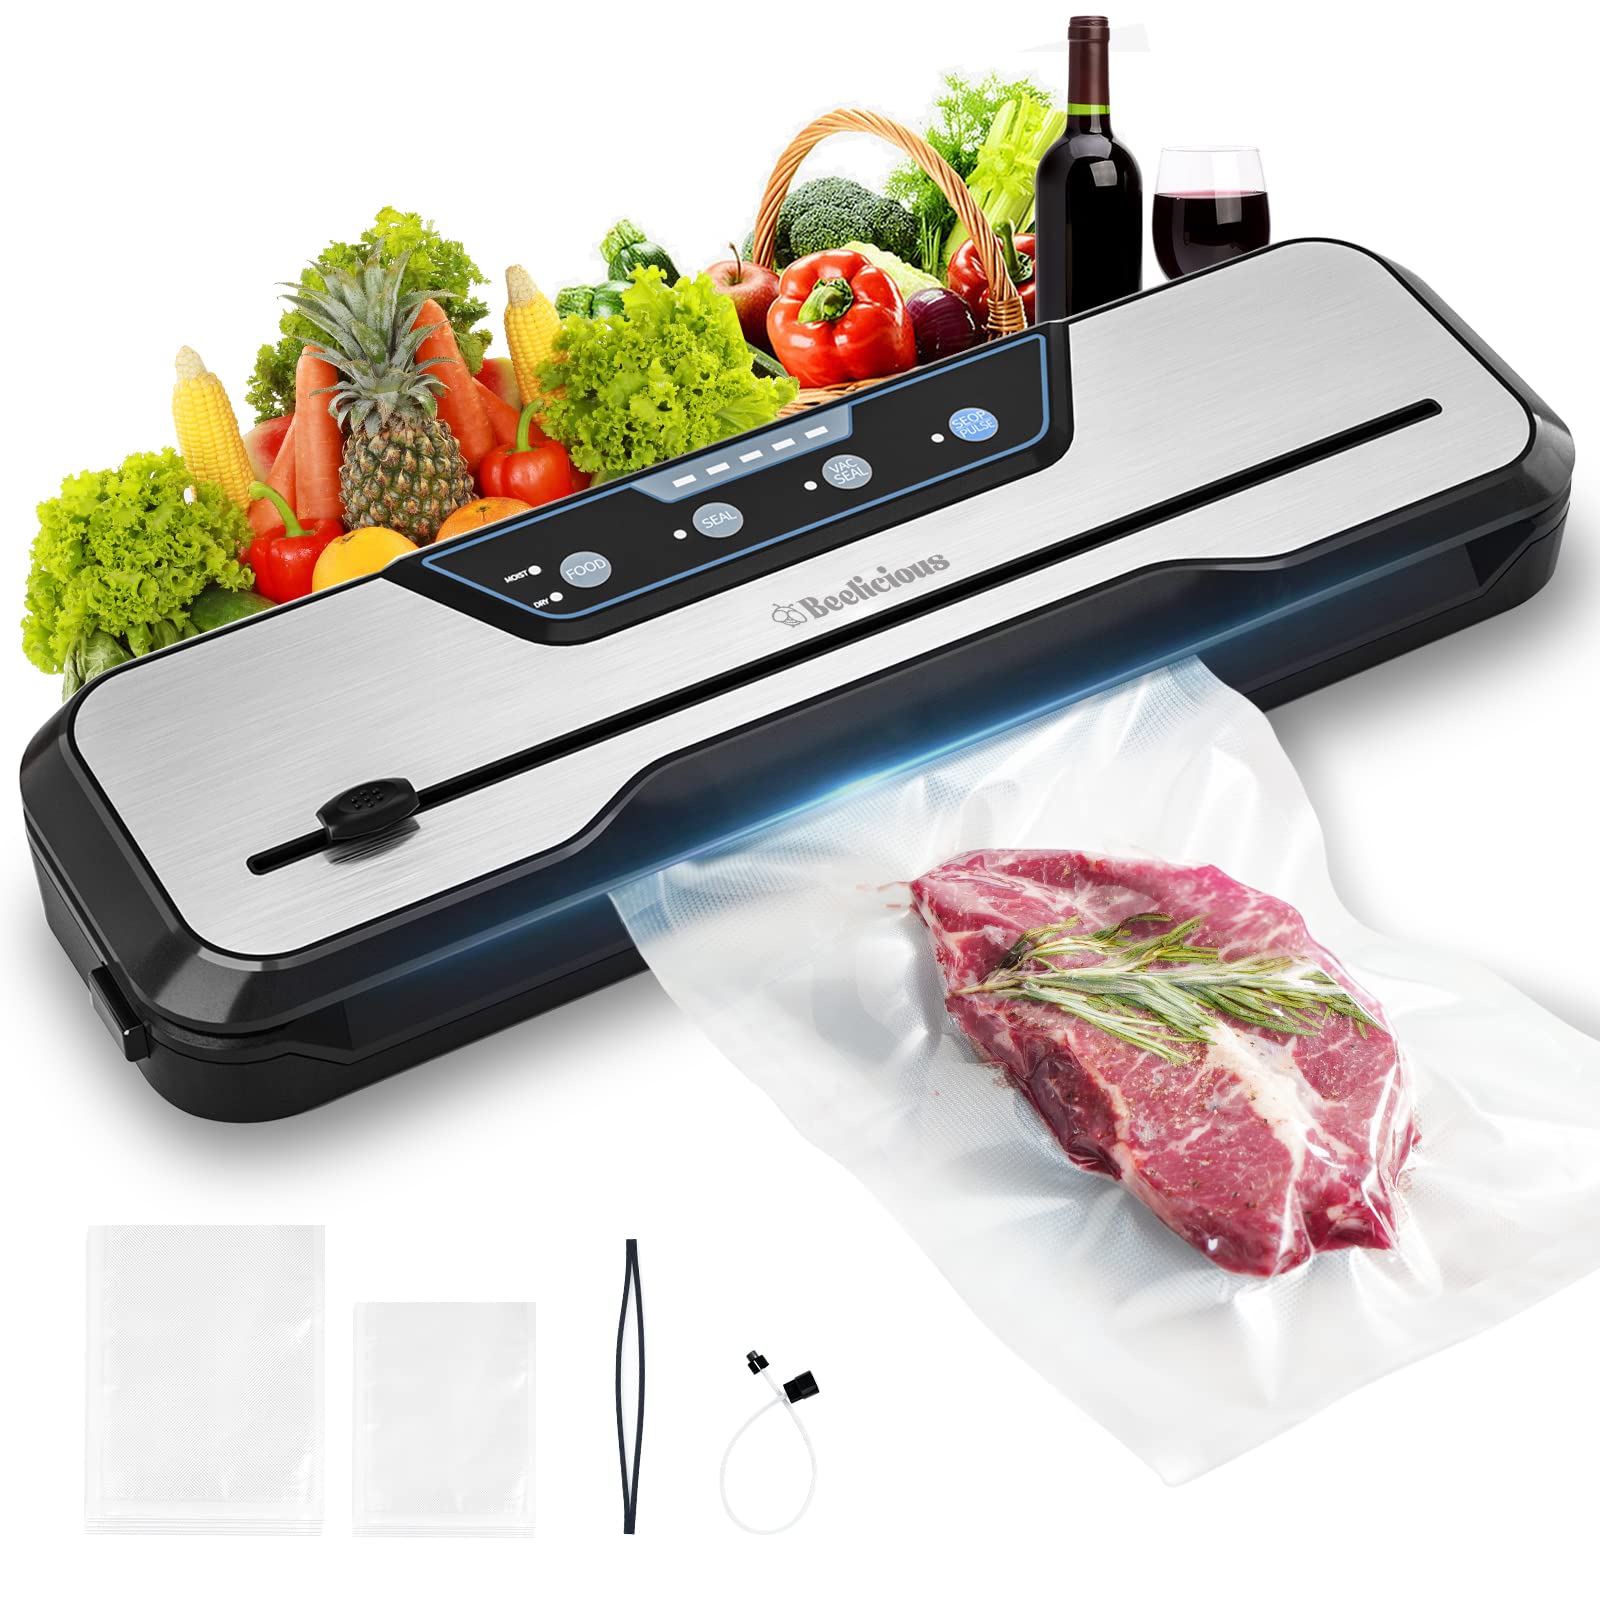 Beelicious Vacuum Sealer Machine with Starter Kit, Beelicious 8-In-1 Powerful Food Vacuum Sealer, with Pulse Function, Moist&Dry Mode and E